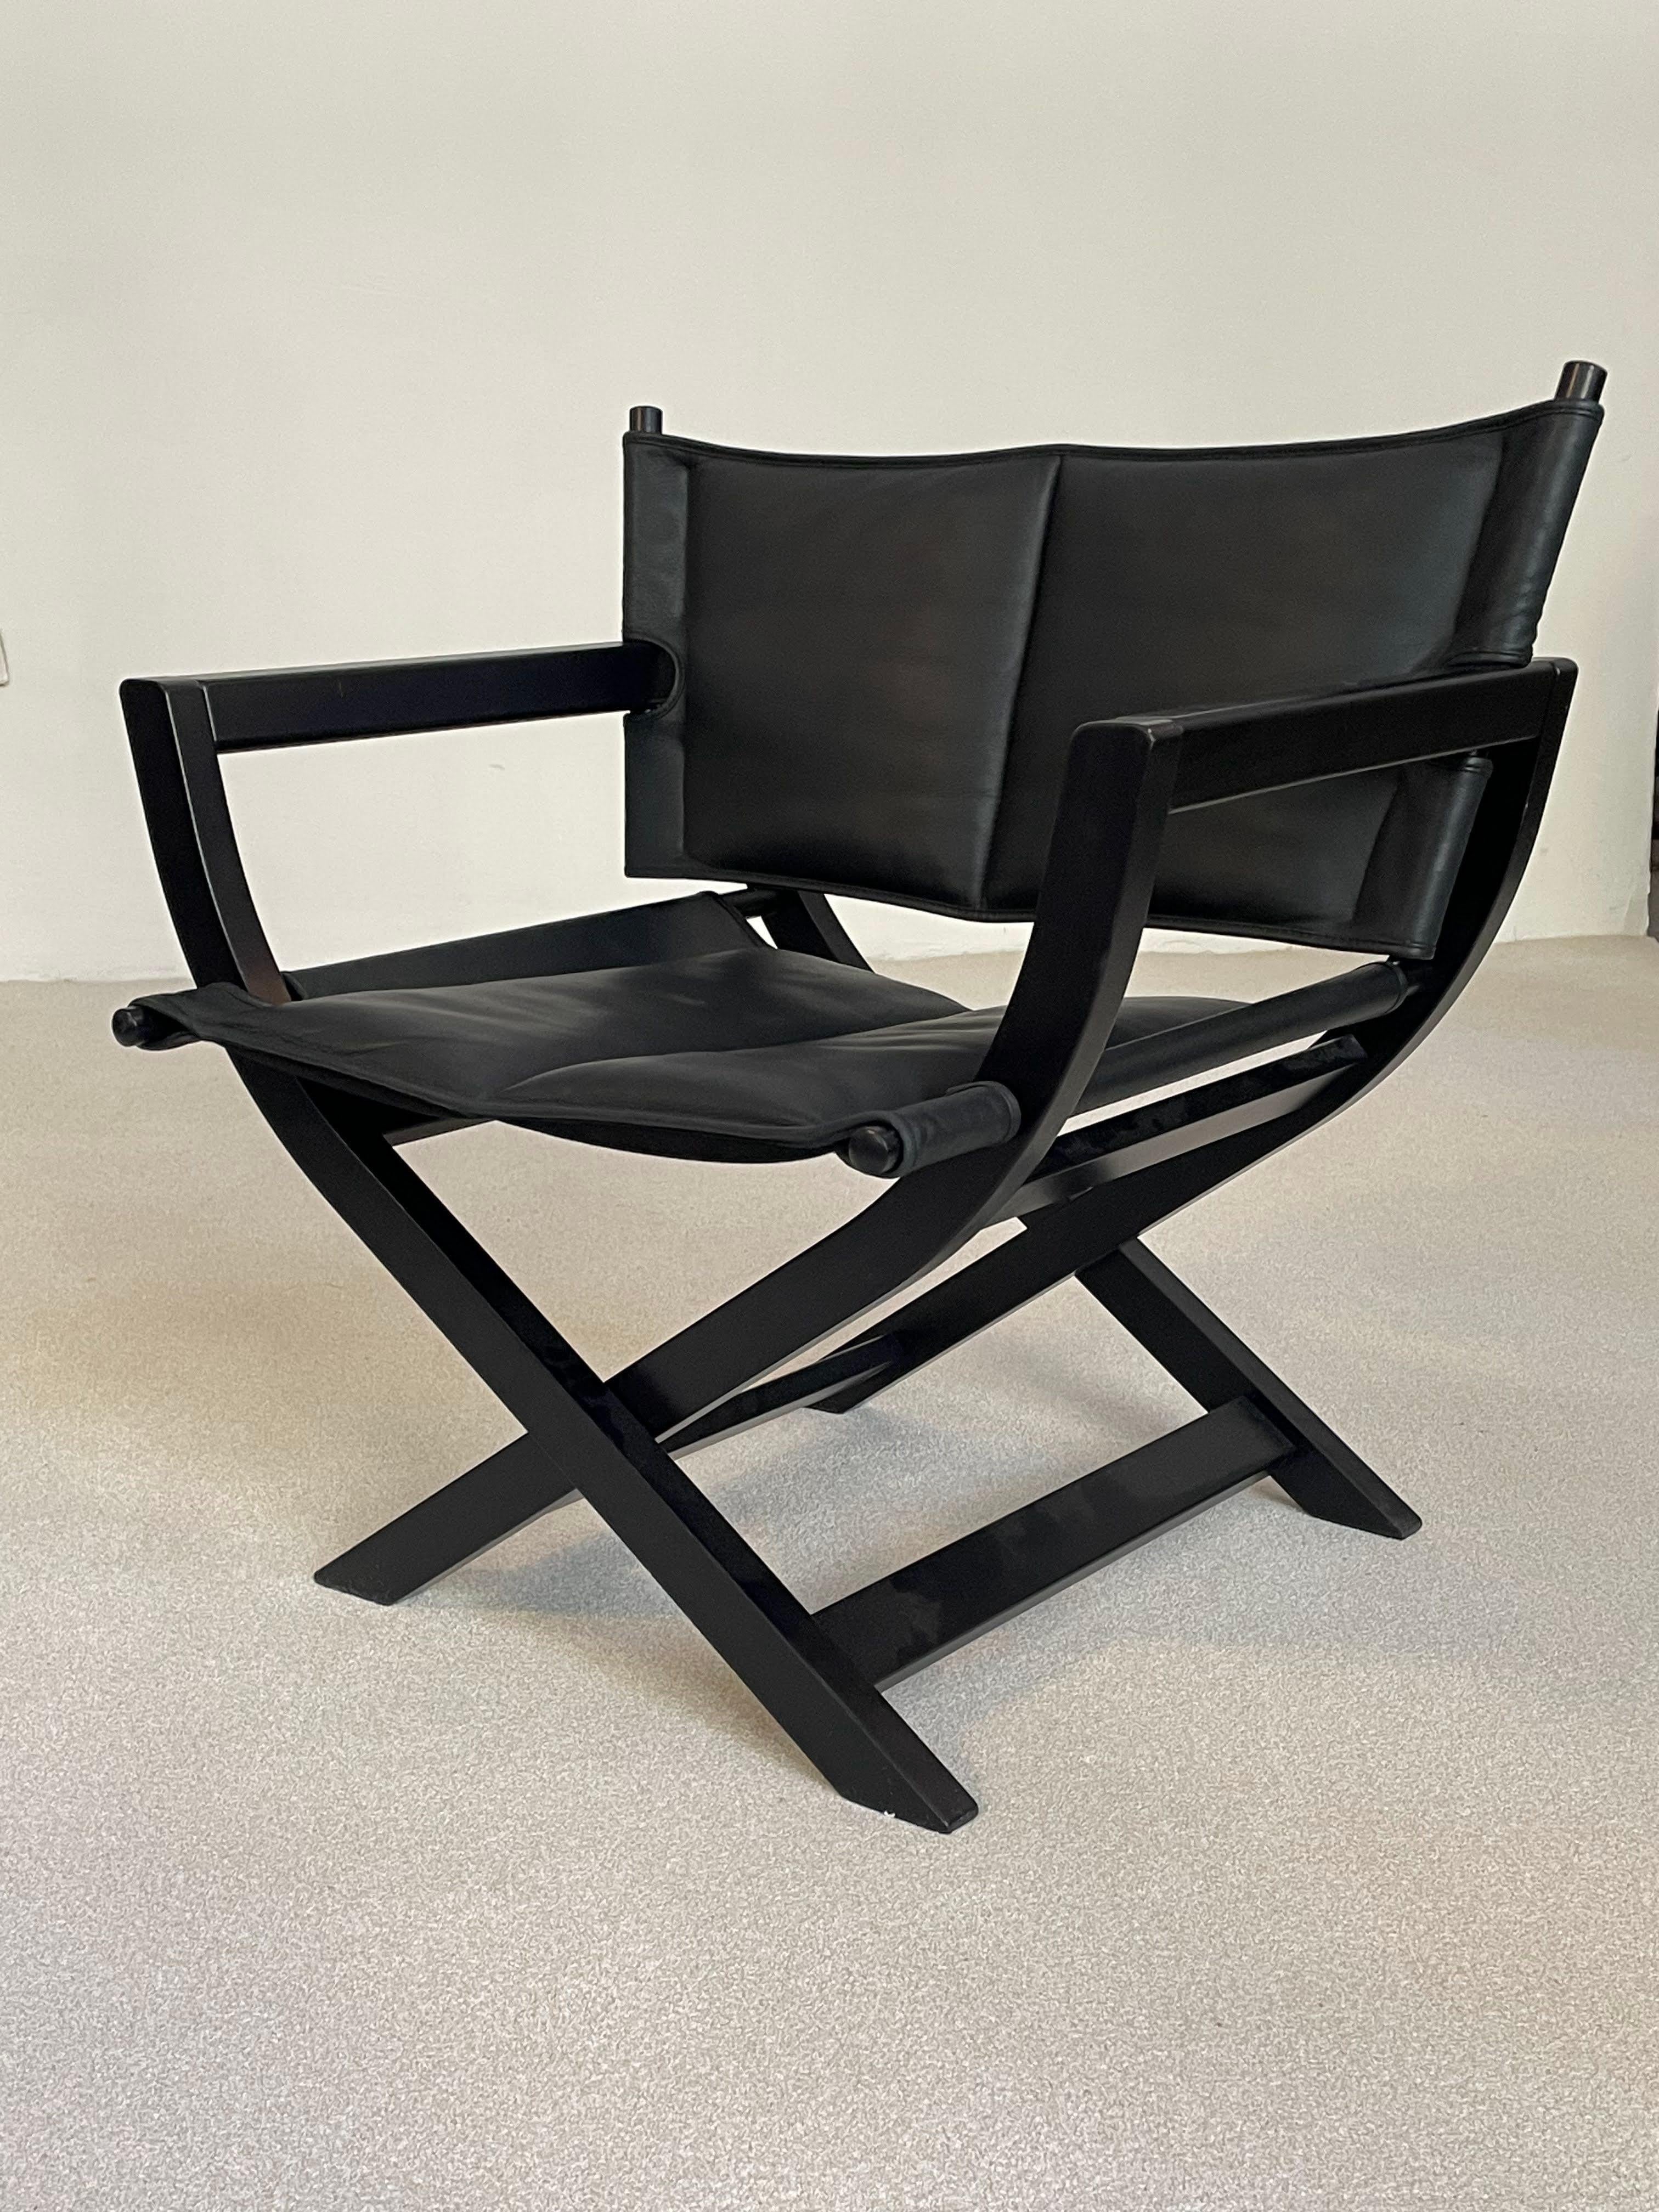 The Cox Ingmar Relling chair is a modern and elegant piece of furniture that embodies the minimalist style. With its comfortable seating surface and ergonomic design, it is an ideal choice for both home and office use. The chair is made from